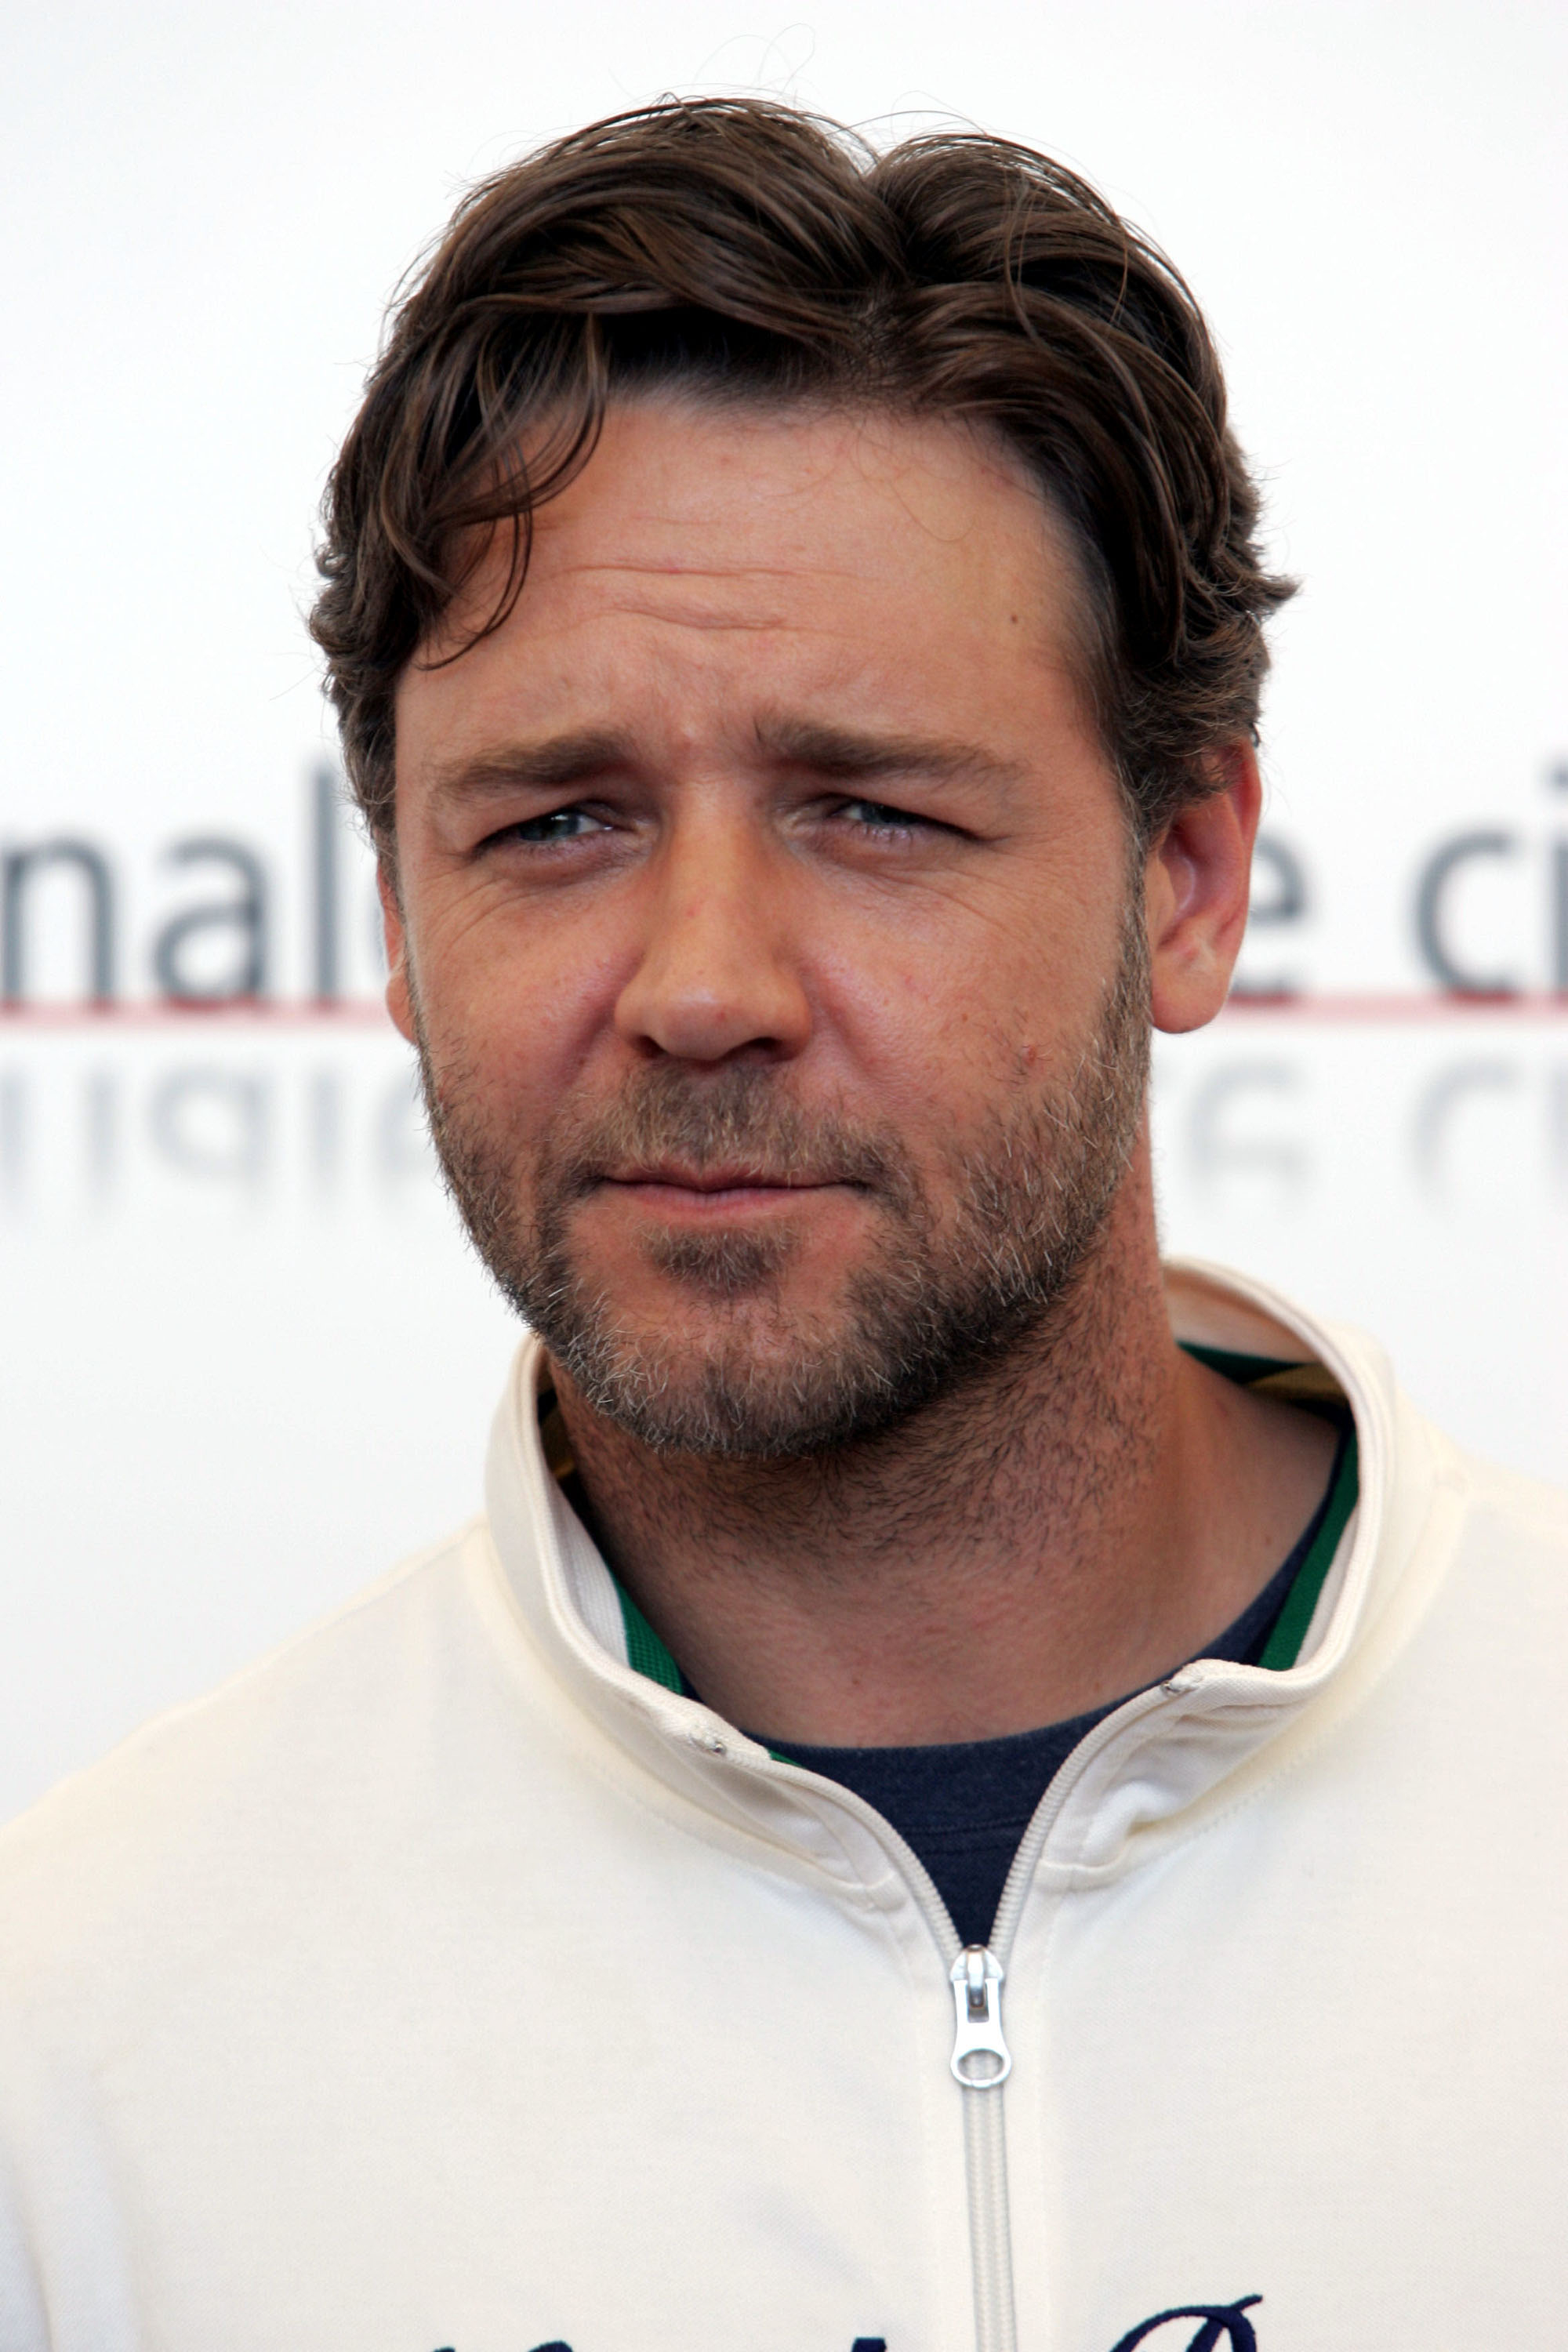 Russell Crowe posing at a film press event